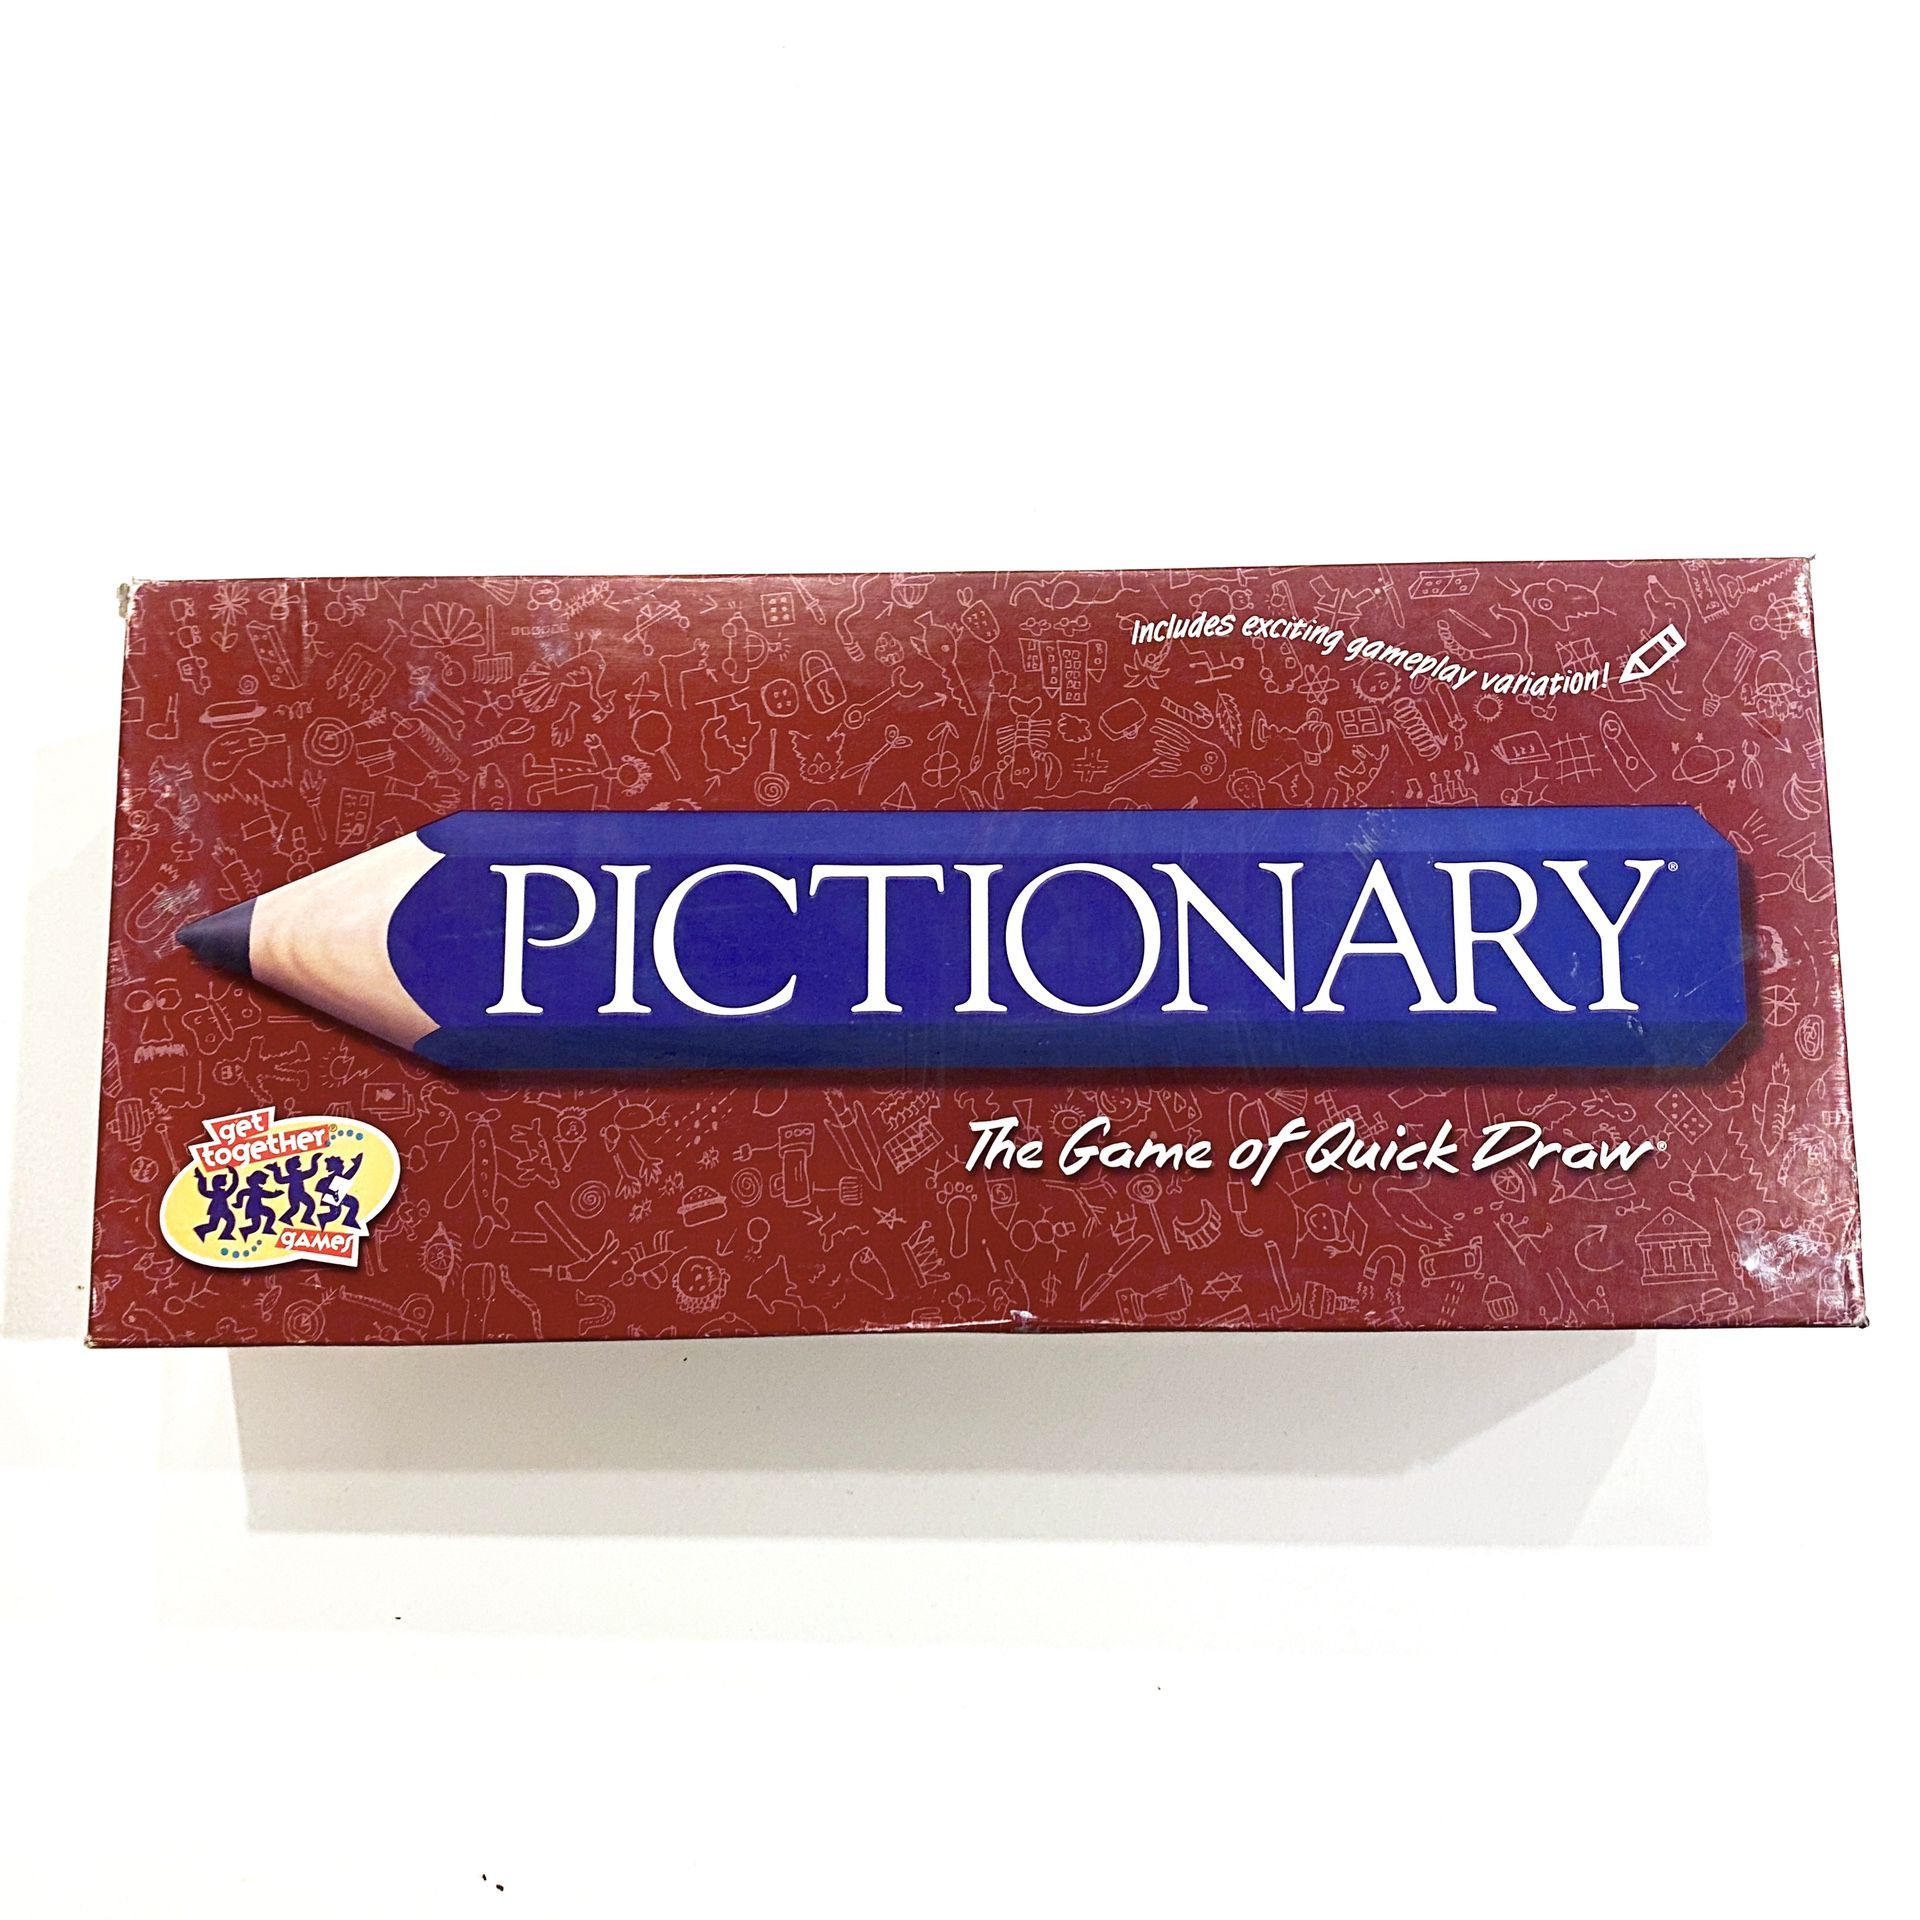 Pictionary : The Game Of Quick Draw - 1993, 2000 Edition VTG Board Game